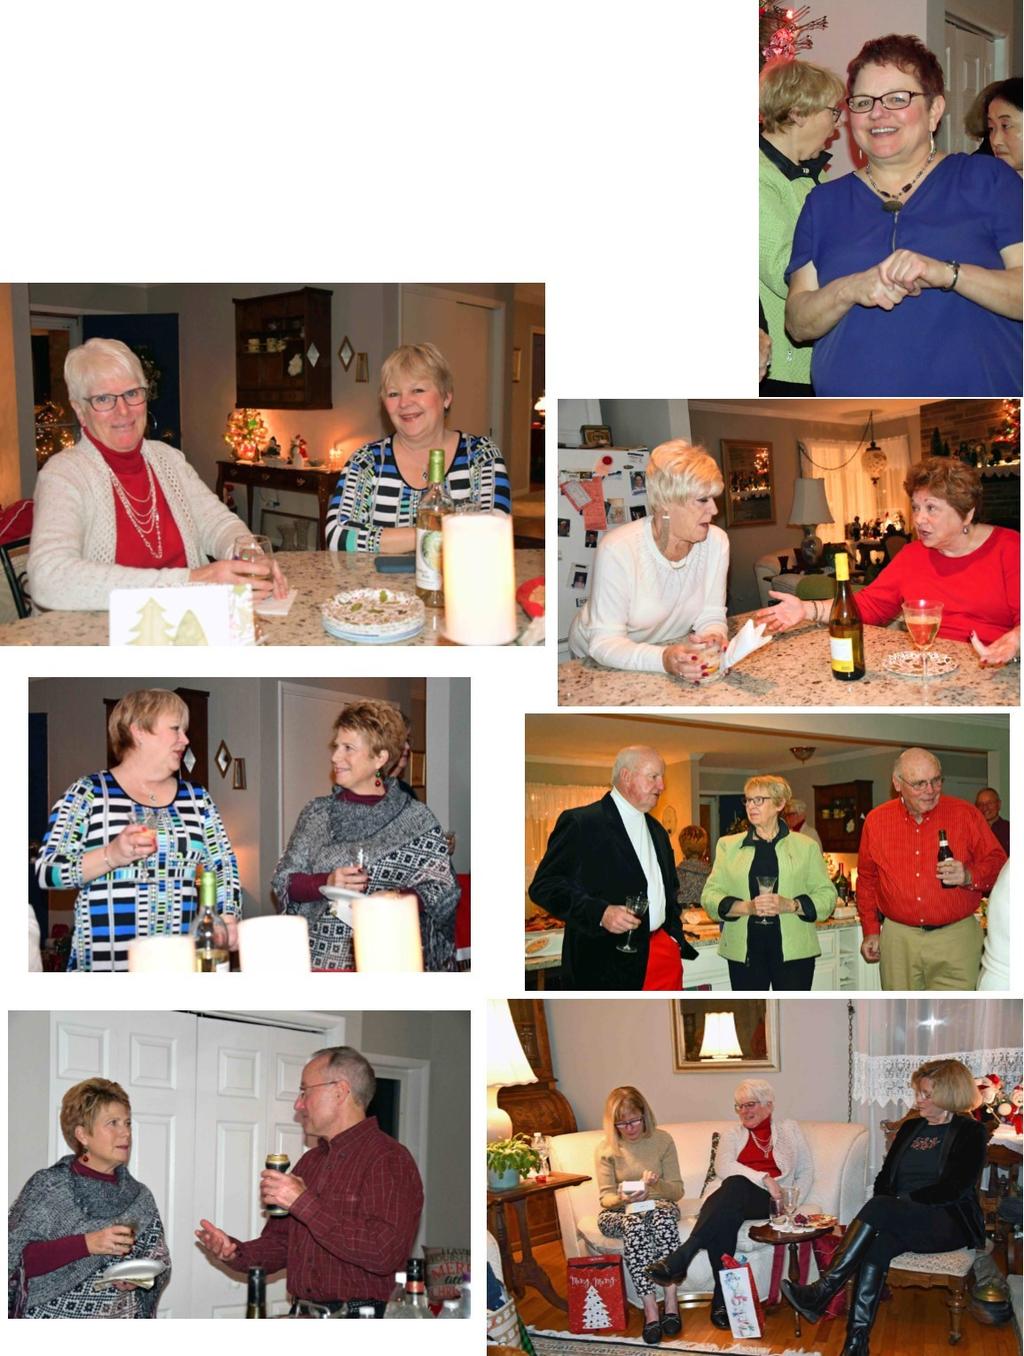 THE HOLIDAY PARTY Saturday, December 15, the place to be was Dottie Daly s as she once again opened her beautiful home for ASGA s Holiday Party.